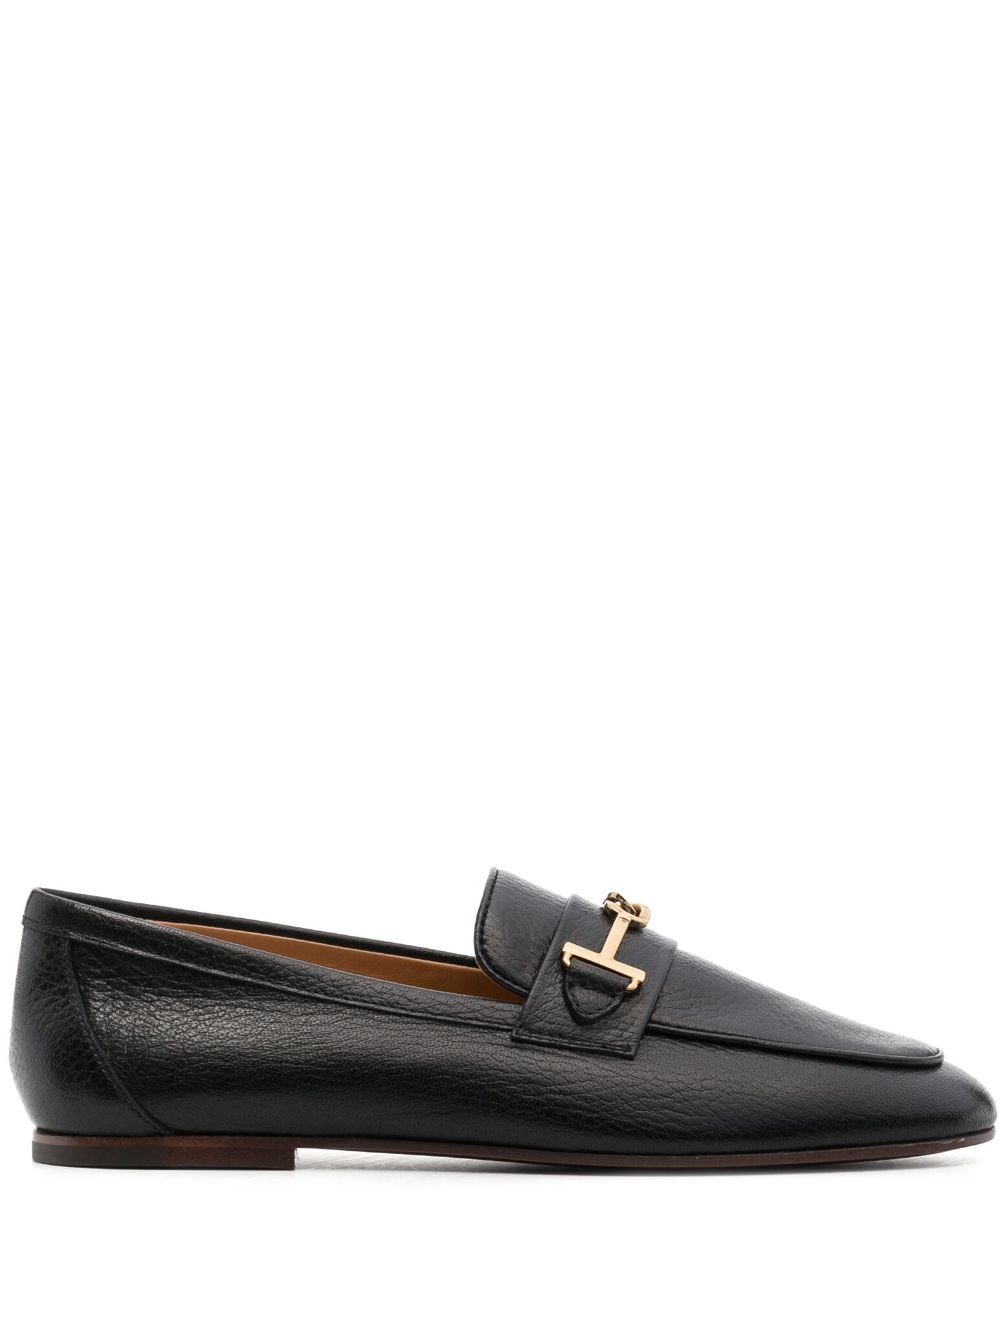 TOD'S T-RING LEATHER LOAFERS